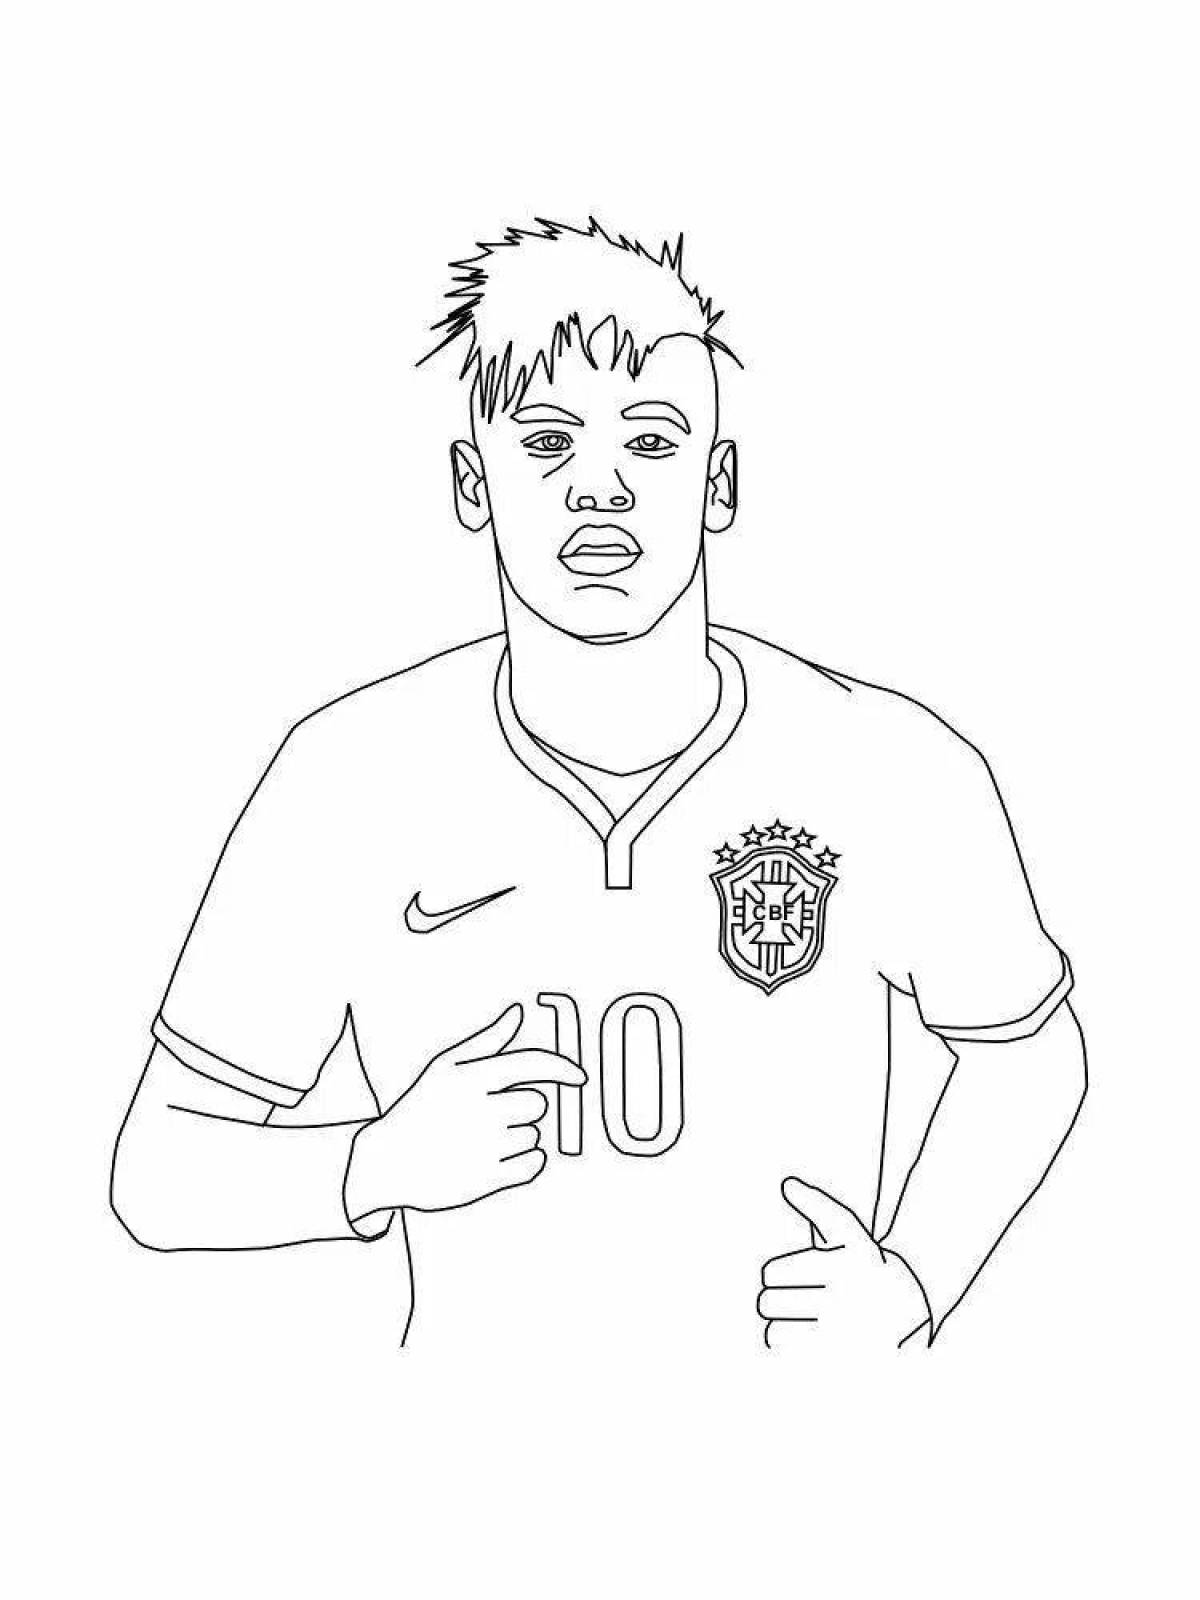 Coloring page bright soccer player pele